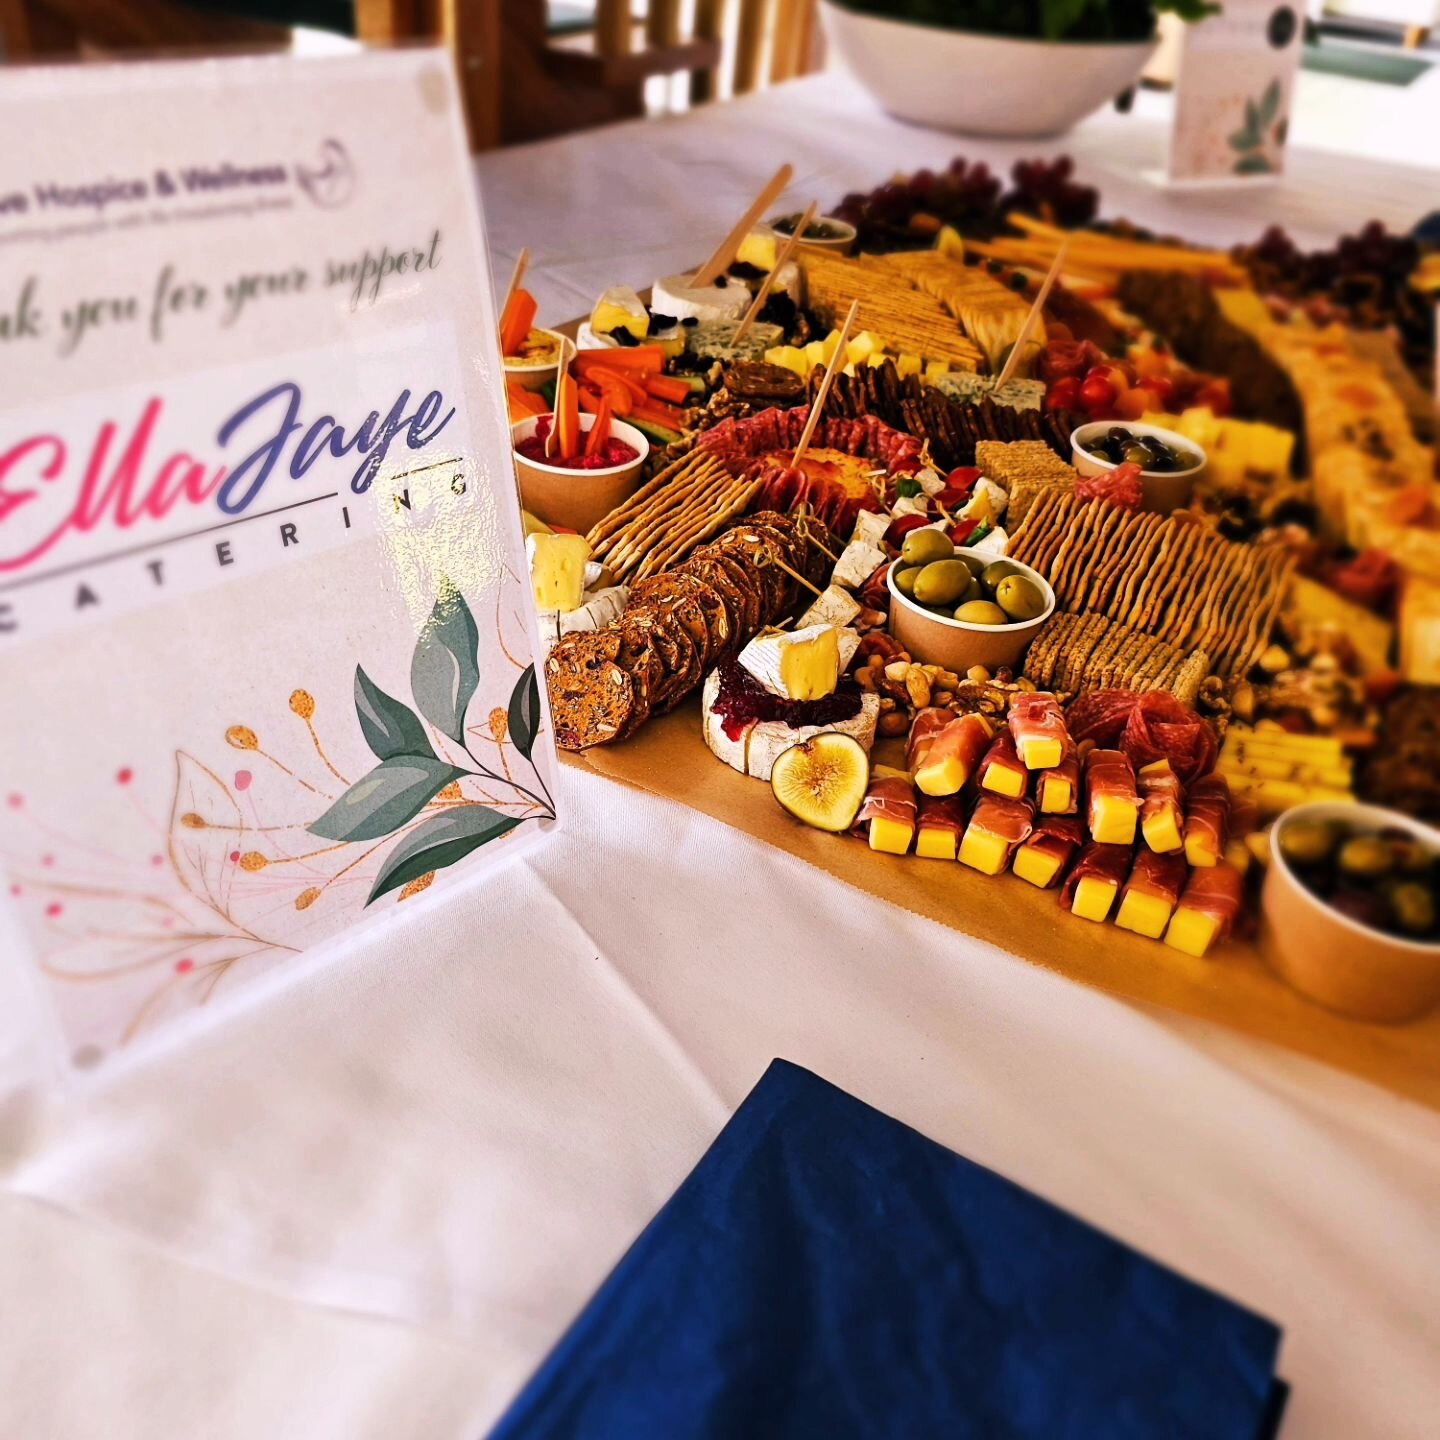 Get-Togethers Just Got Tastier with Ella Jaye&rsquo;s Grazing Tables!

Hey there, foodies! 🍽️ Ready to make your events the talk of the town? Ella Jaye Catering brings you the ultimate grazing tables that are all about that chic, laid-back vibe.

✨ 